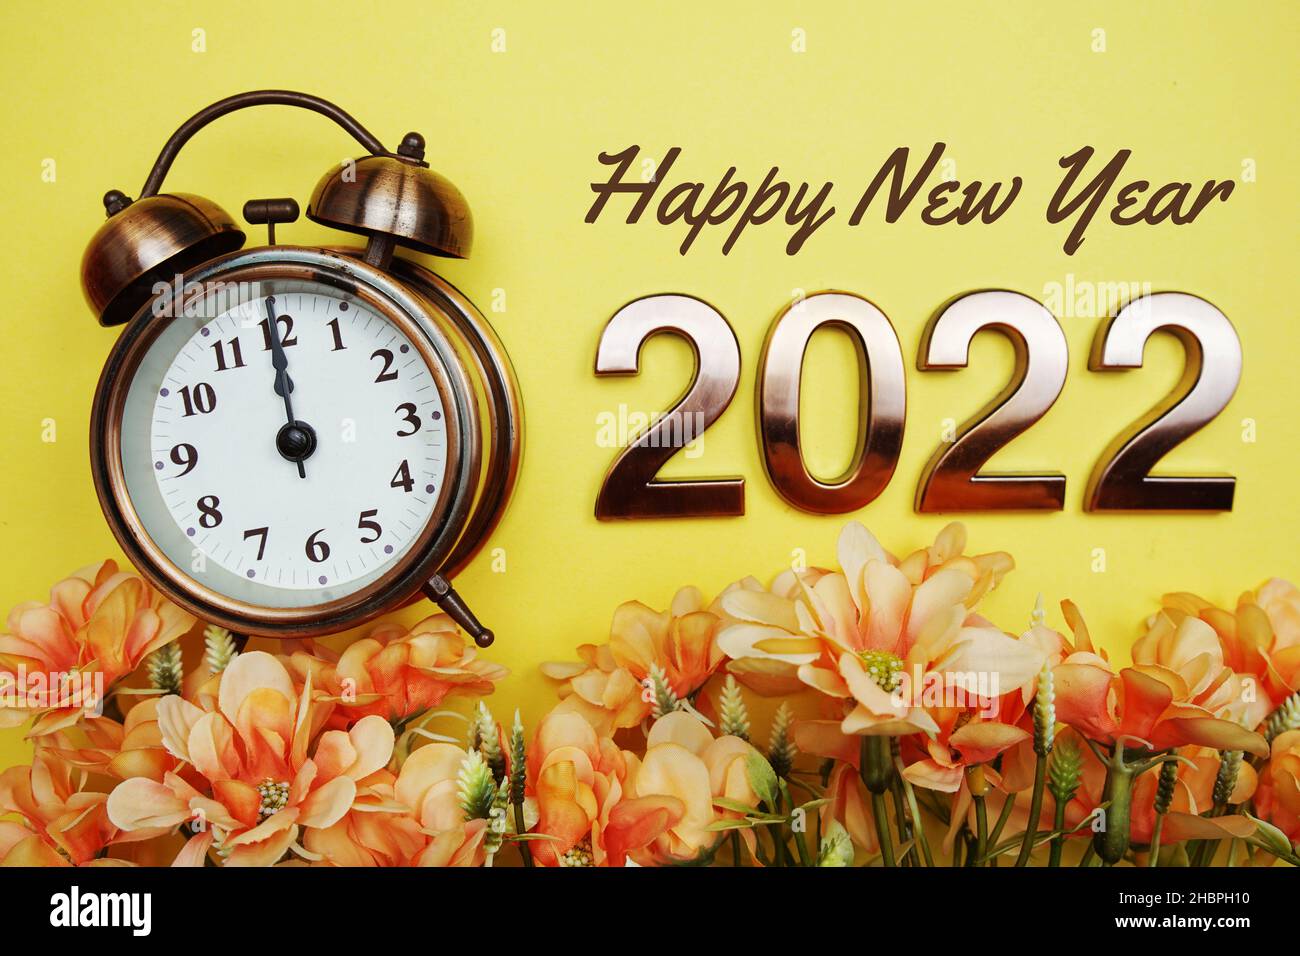 Happy New Year 2022 text with alarmclock and flower decoration on yellow background Stock Photo